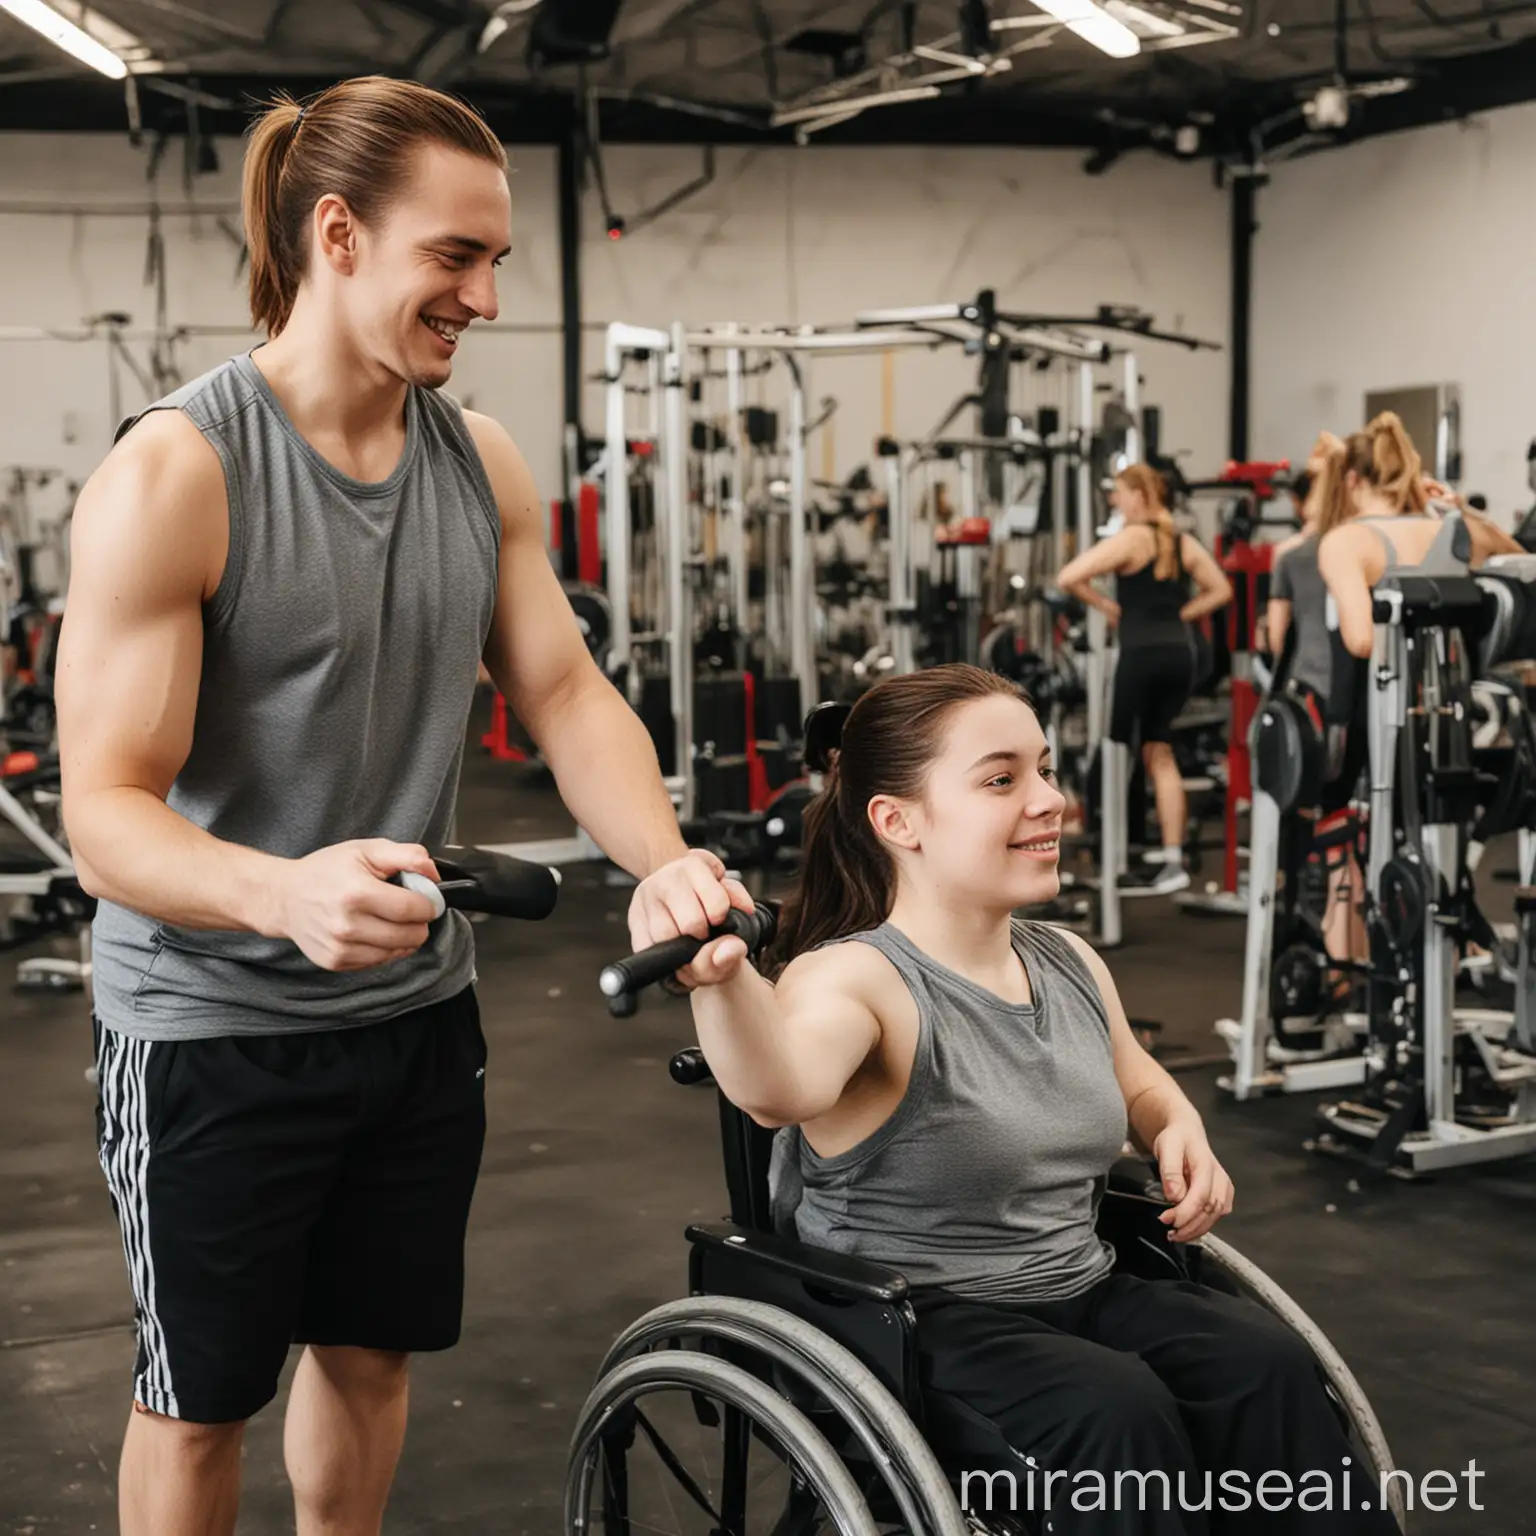 person with disability training in gym